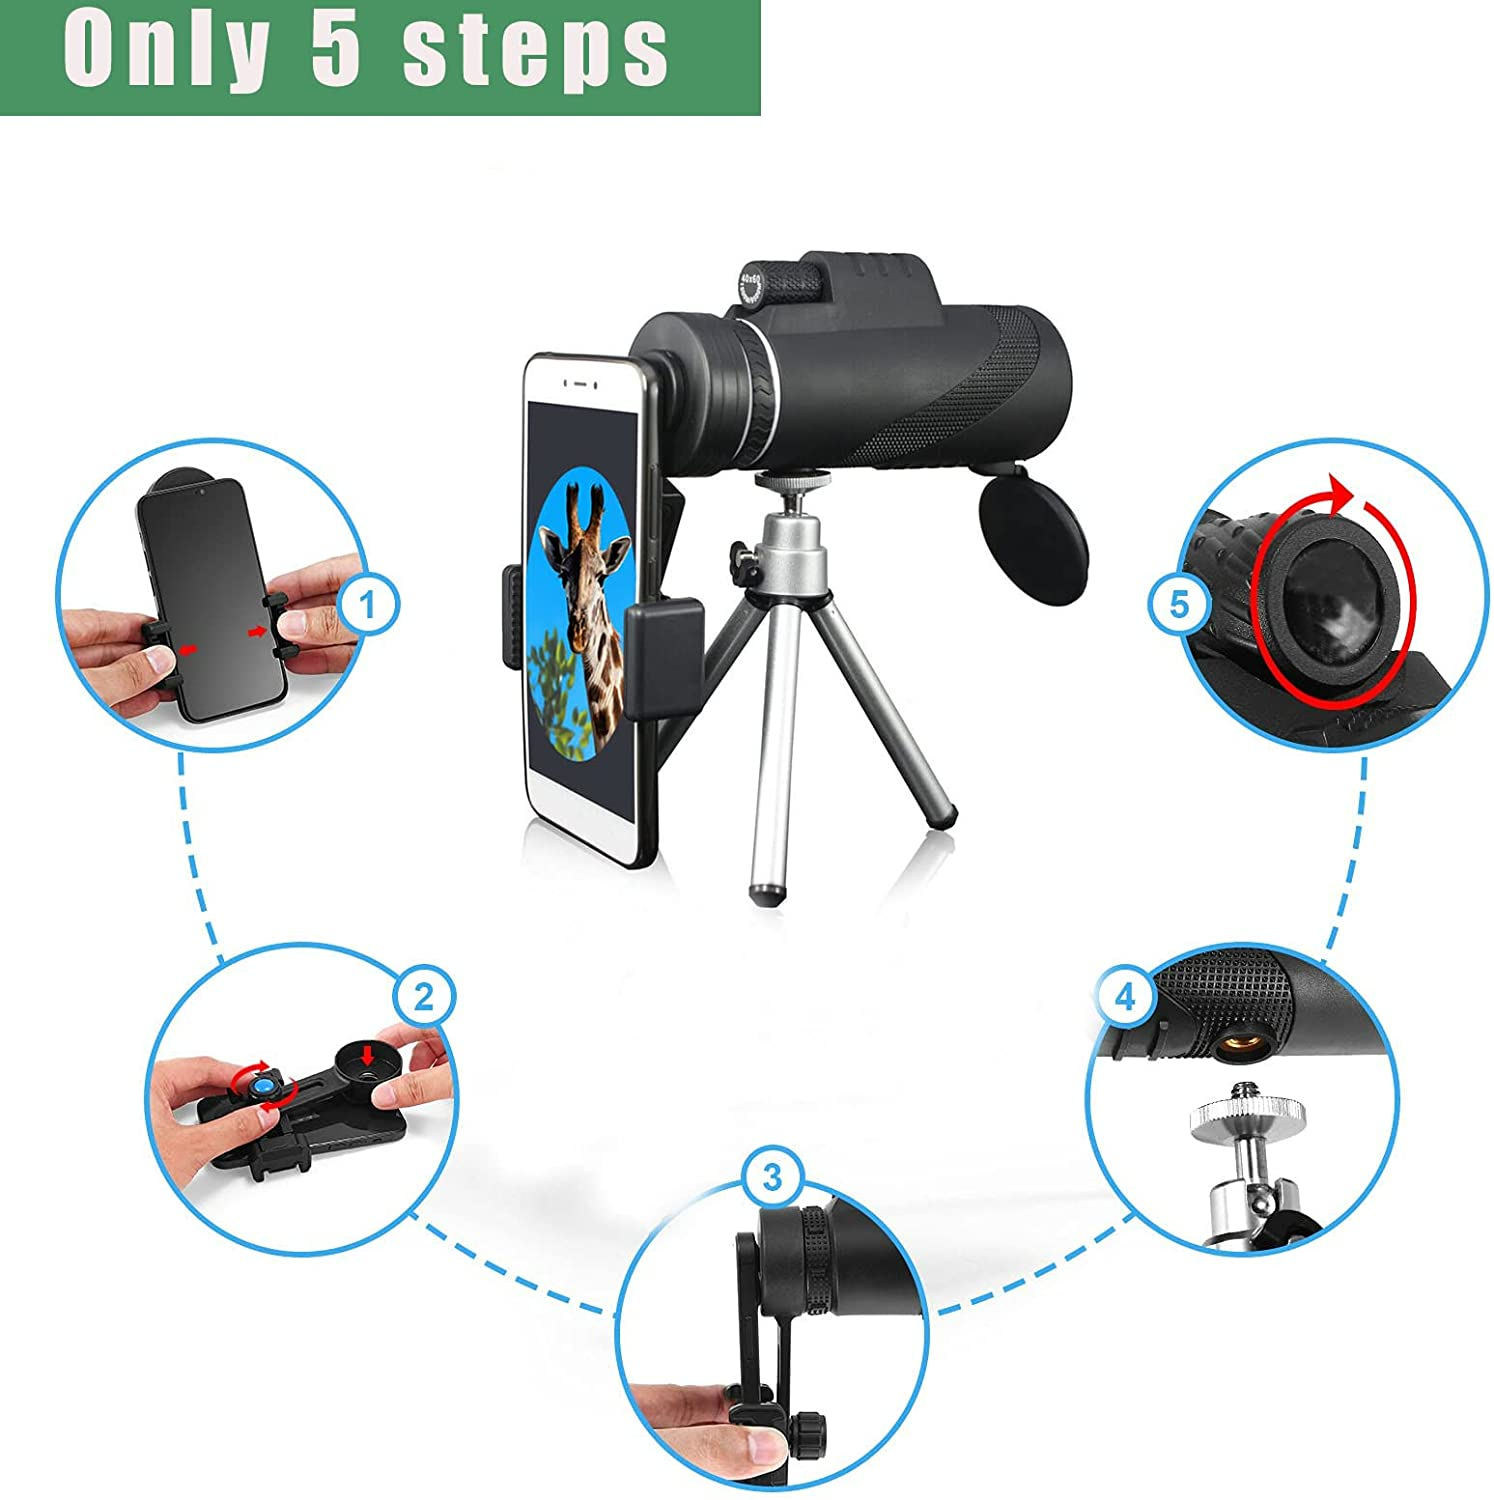 Monocular Telescope, High Powered Night Vision Monocular Telescope for Smartphone, Handheld Telescope with Phone Adapter